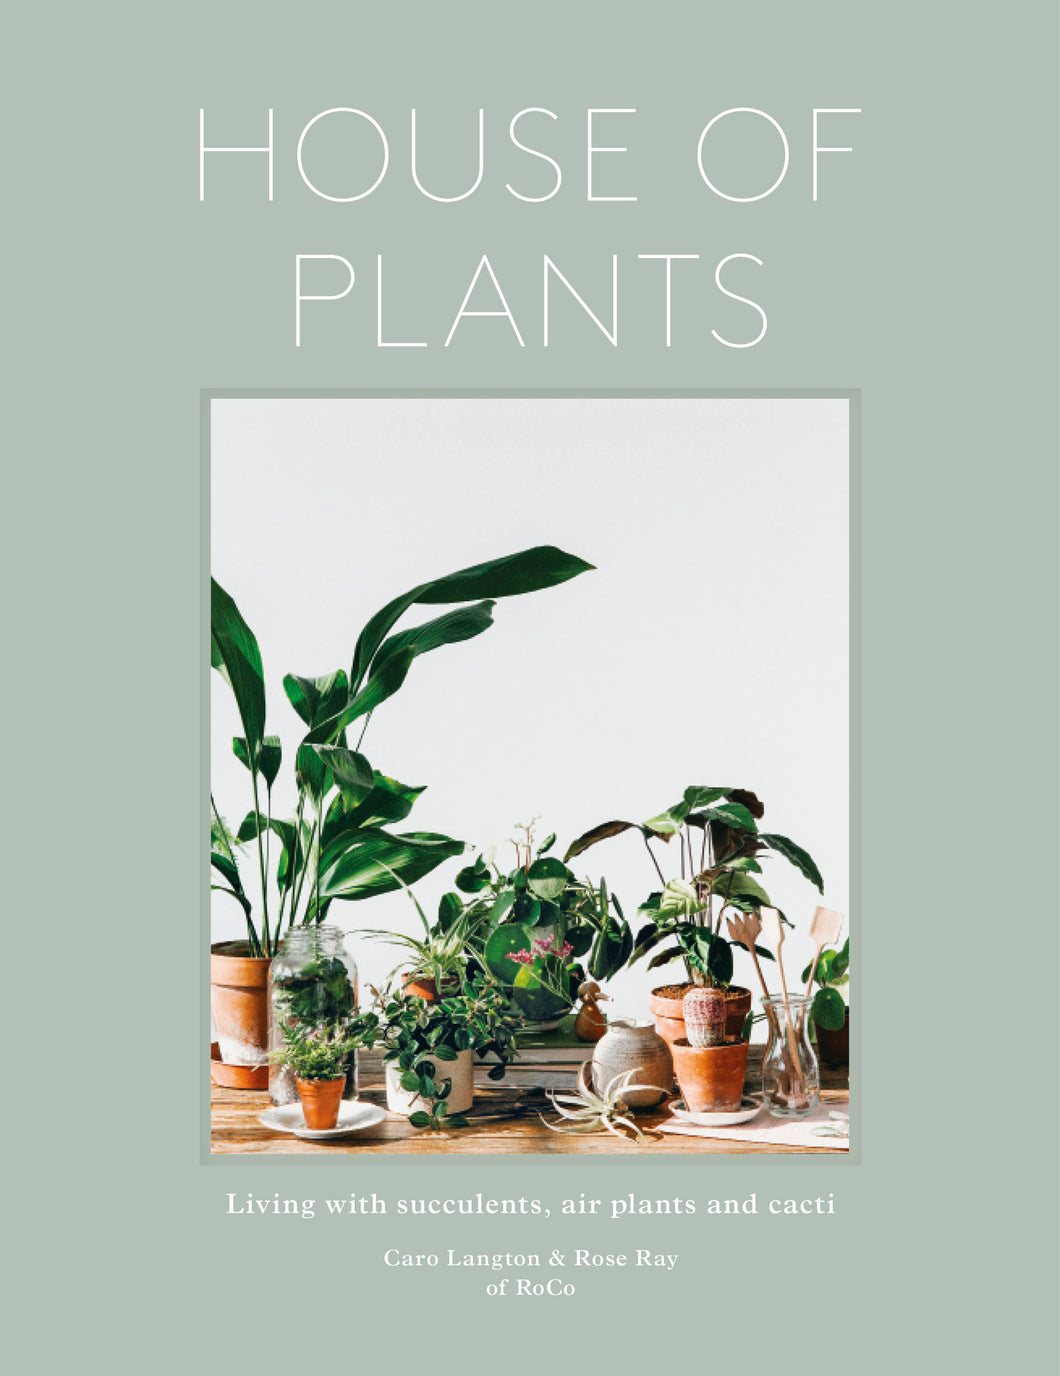 HOUSE OF PLANTS (SUCCULENTS, AIR PLANTS AND CACTI)